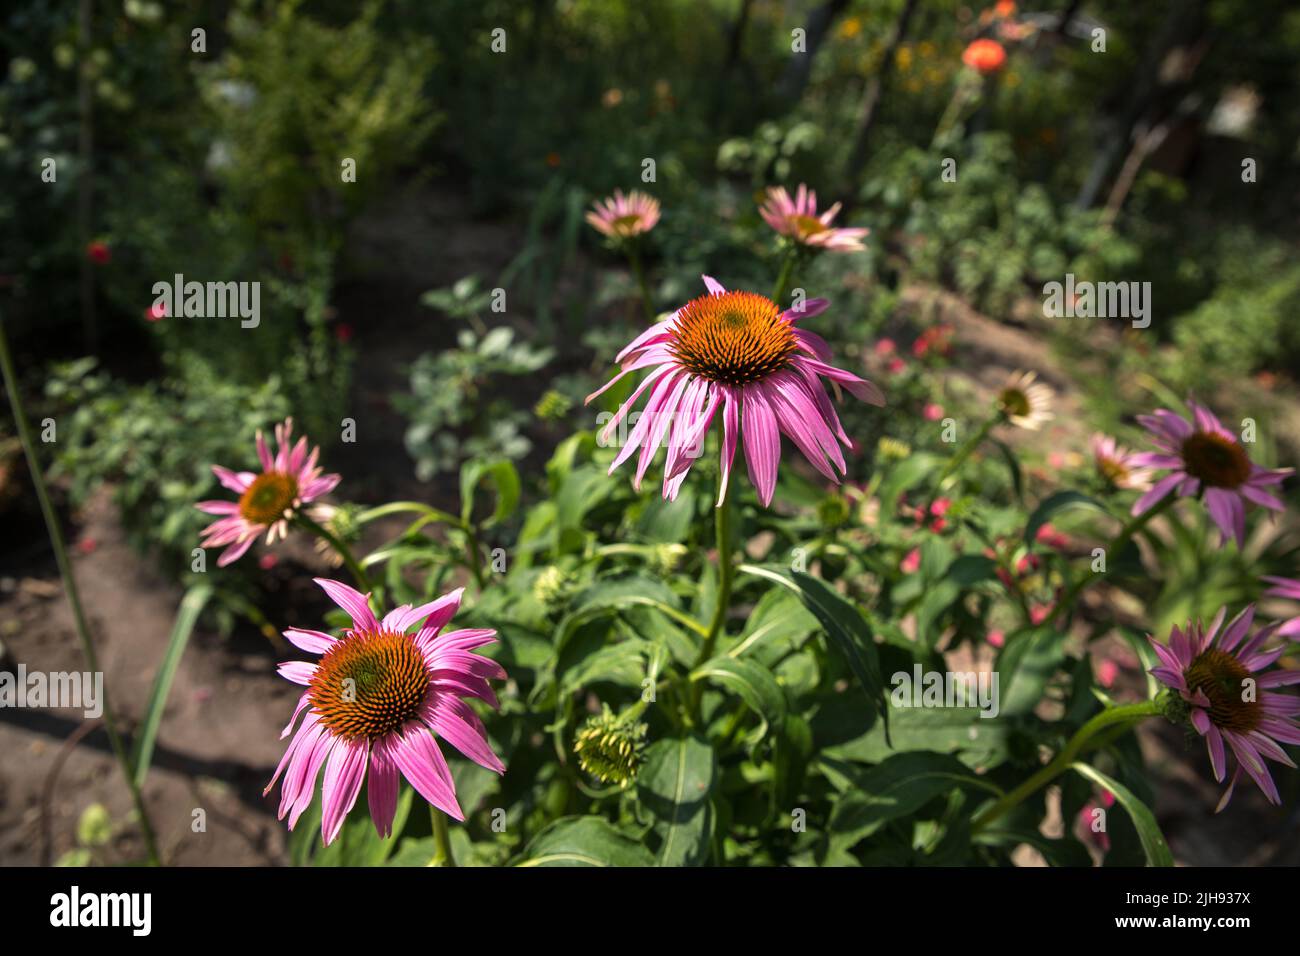 Echinacea purpurea. Flower plant commonly known as coneflower. Stock Photo